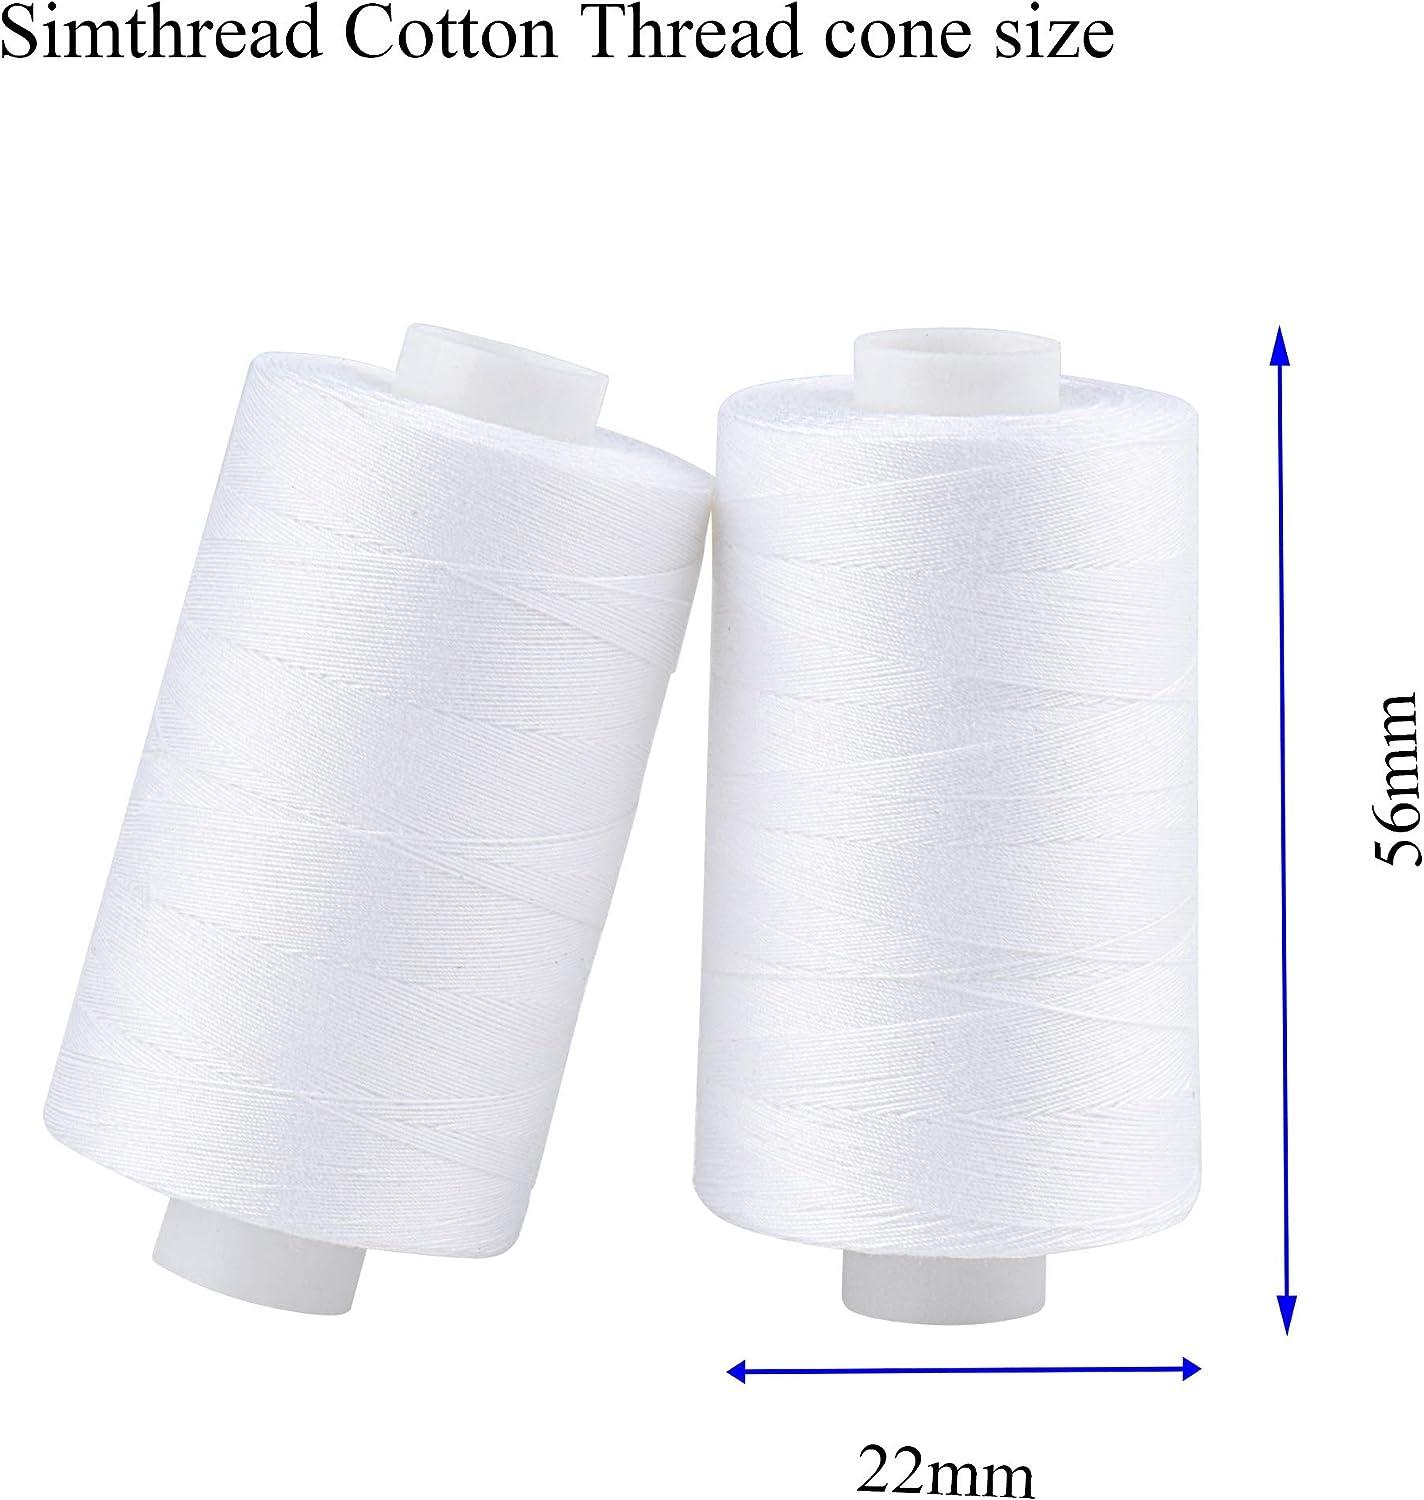 Simthread 20 Colors All Purposes Cotton Quilting Thread 50wt 3 Plies for Piecing Sewing Embroidery Etc - 550 Yards Each